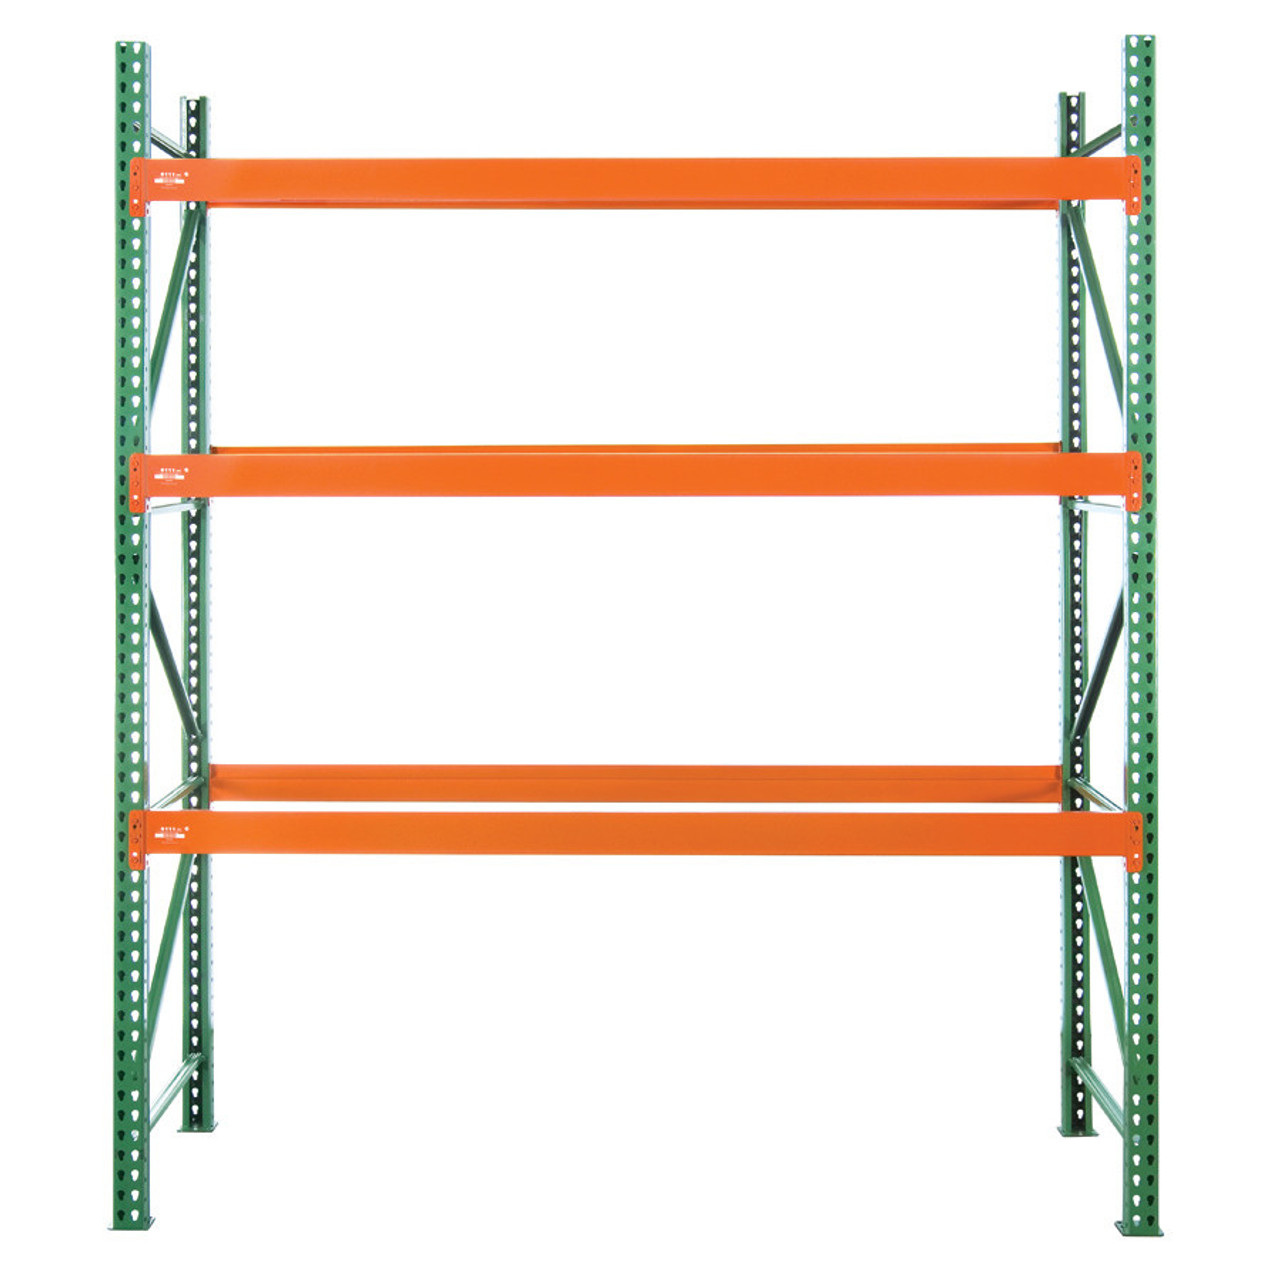 3 Level 144w x 48d x 144h Pallet Racking with Wire Decking Starter